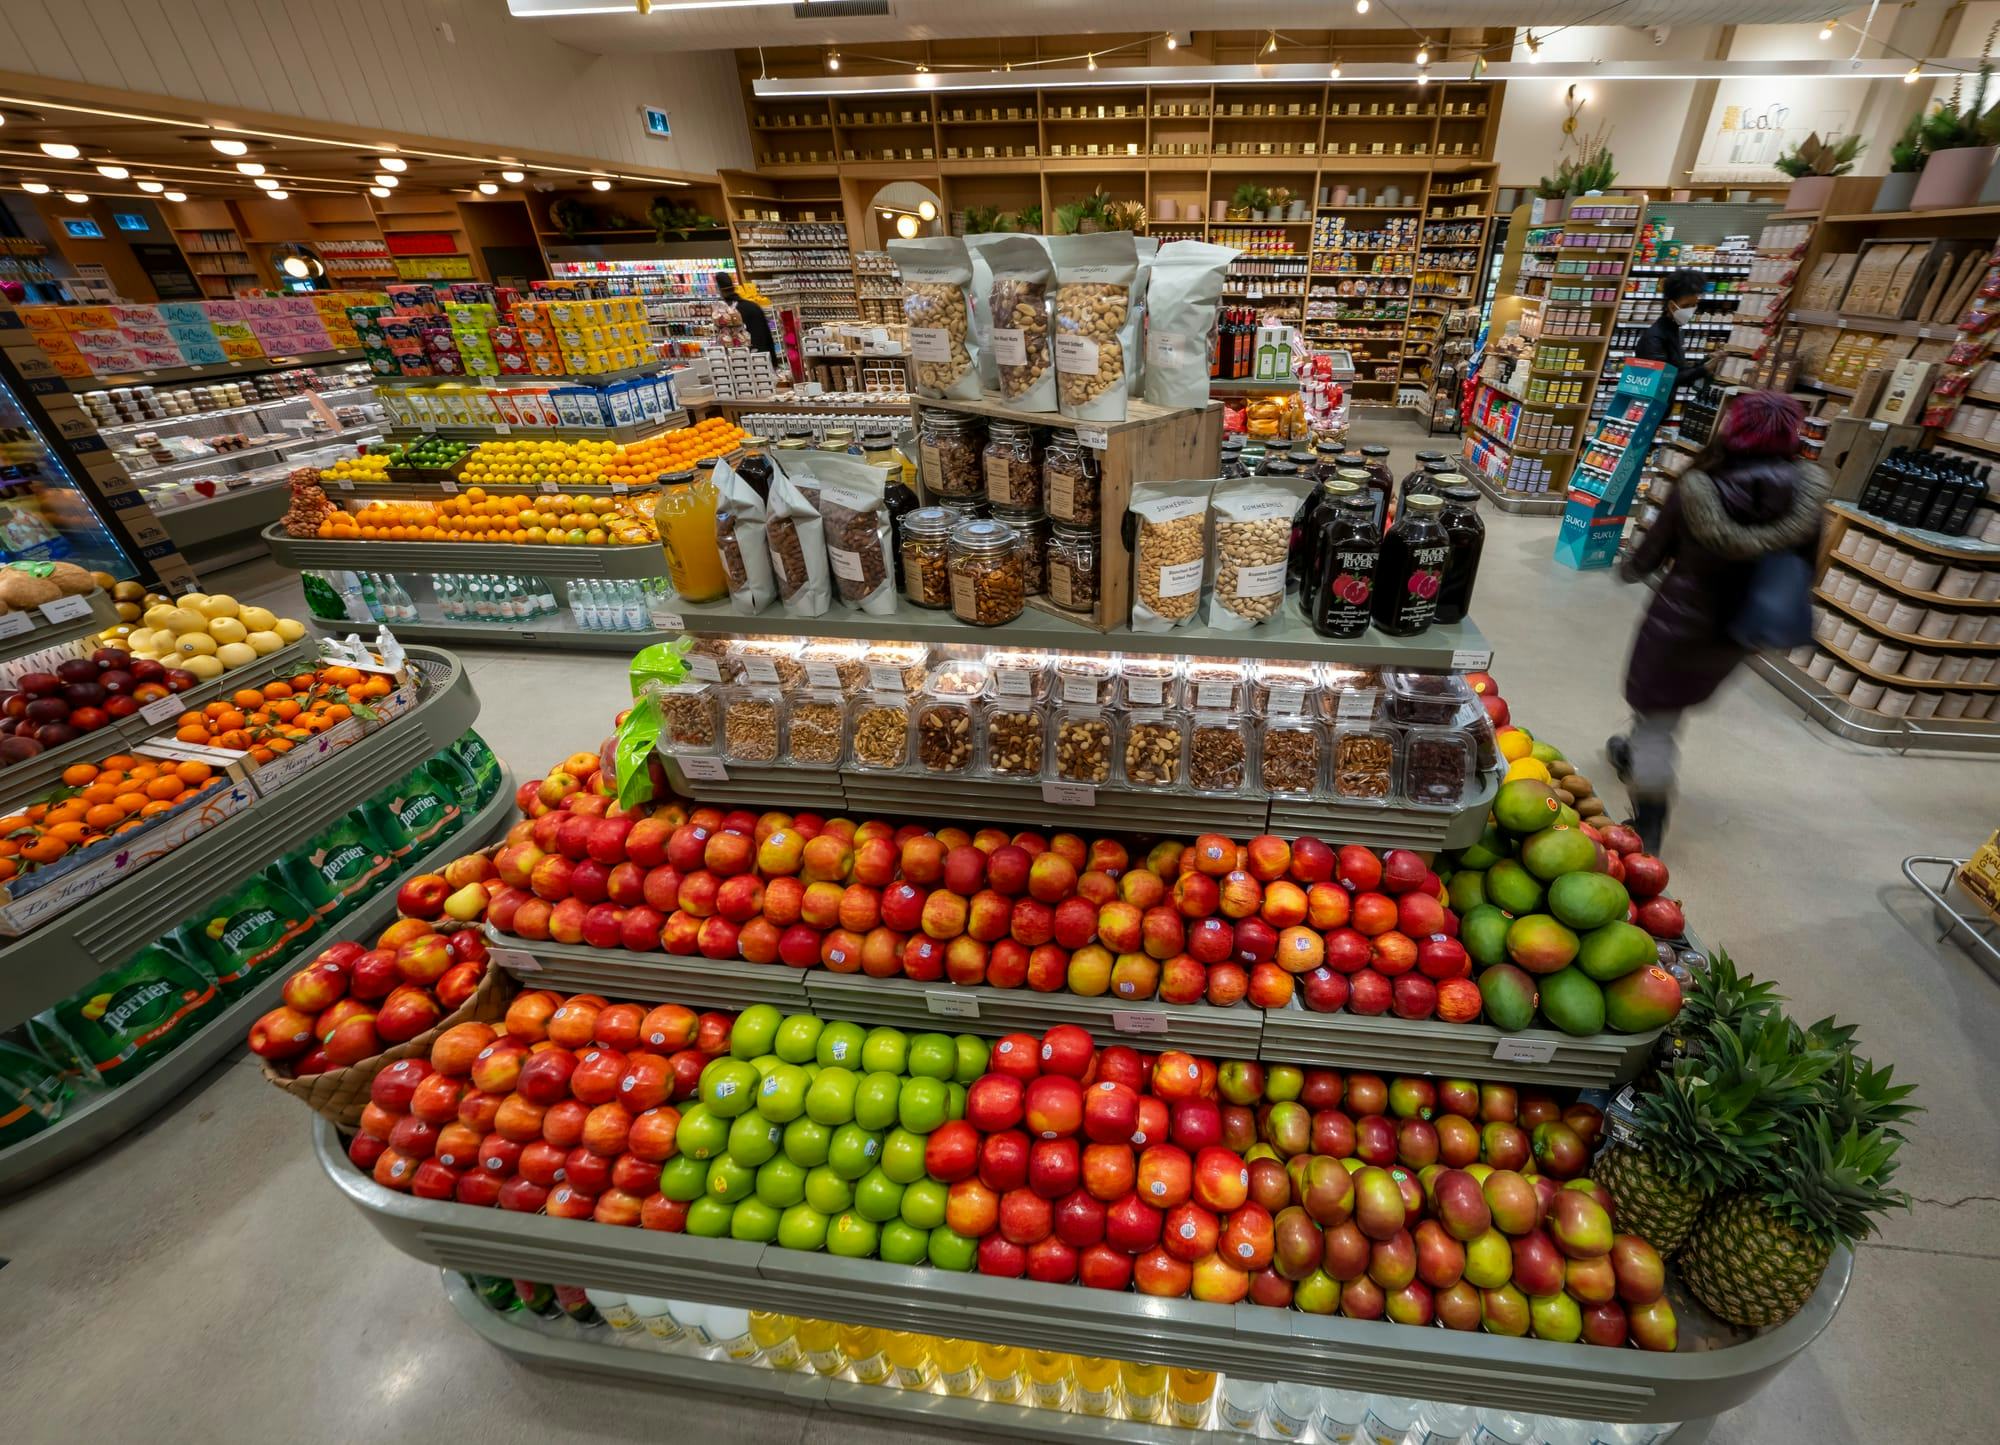  A fruit stand is seen in a grocery store